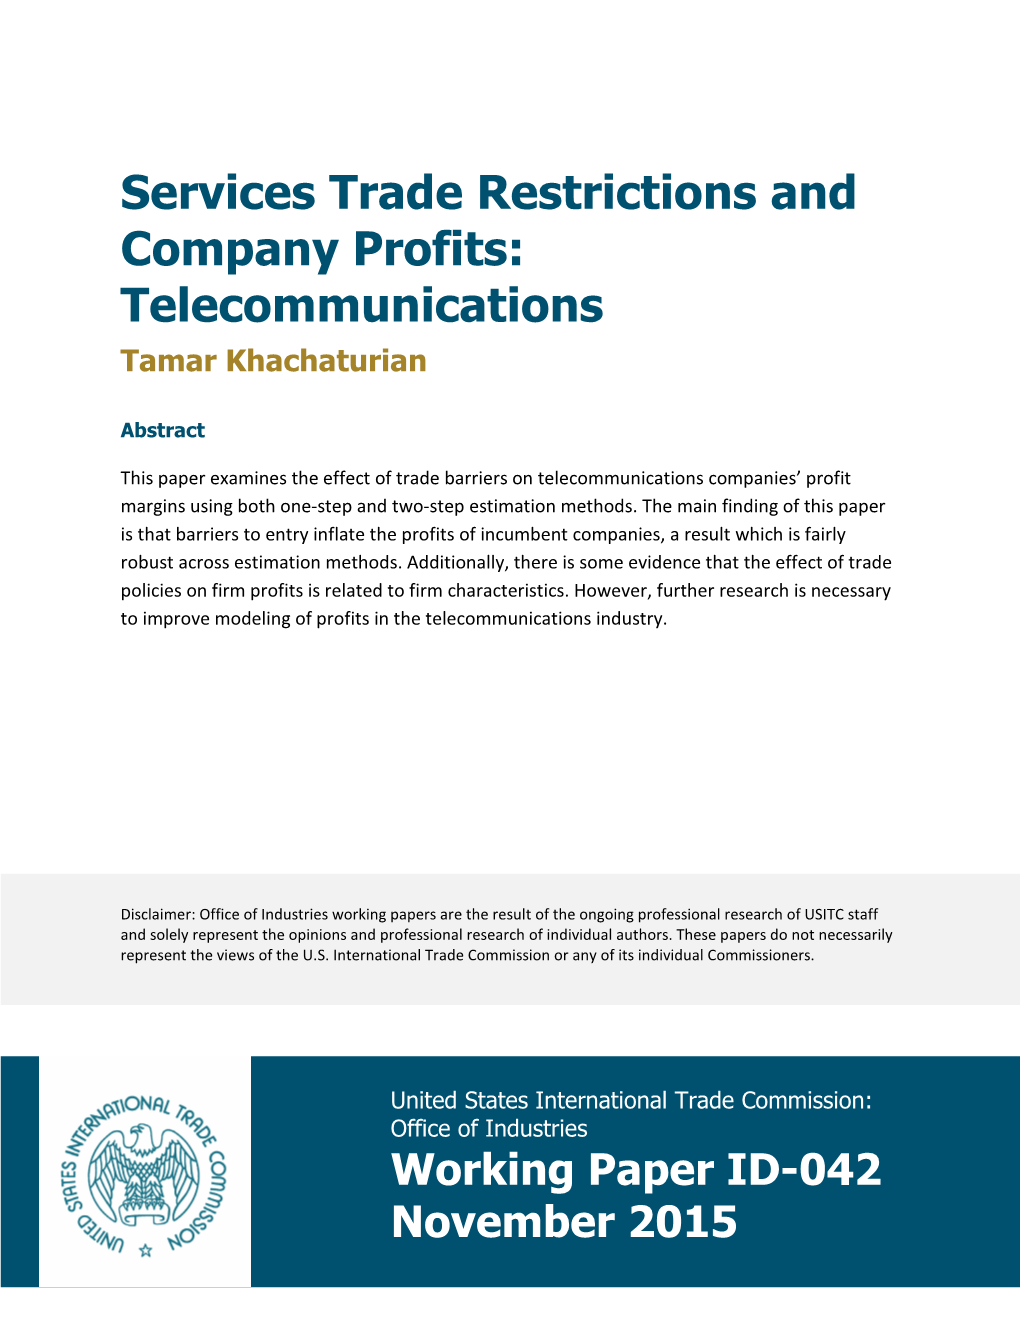 Services Trade Restrictions and Company Profits: Telecommunications Tamar Khachaturian